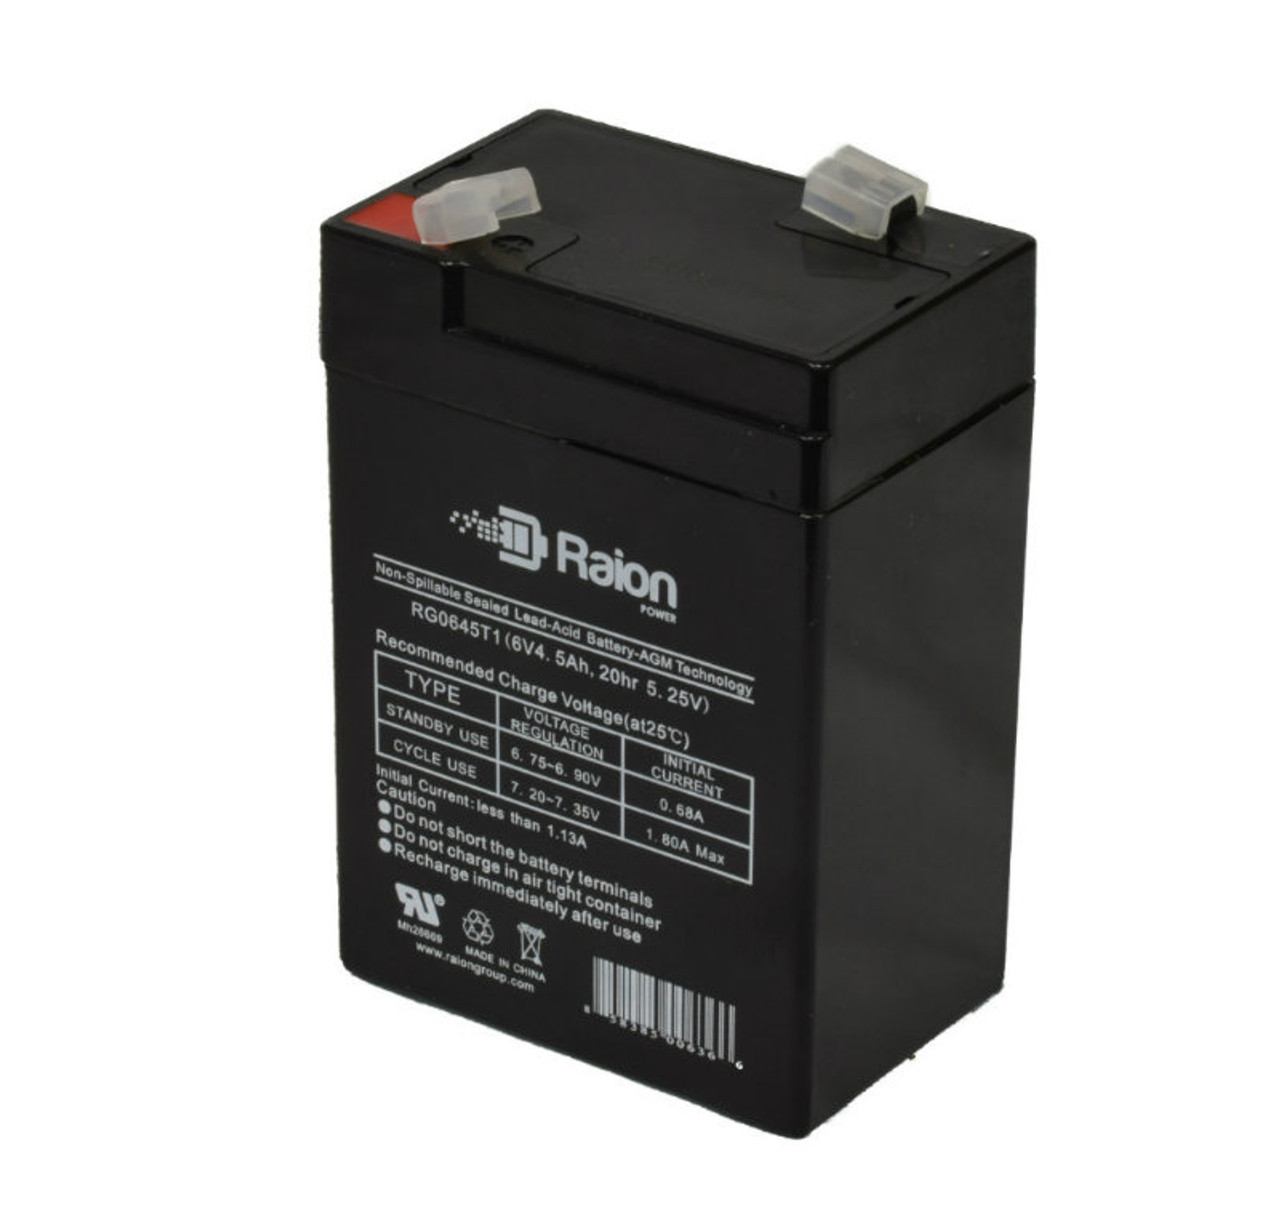 Raion Power RG0645T1 6V 4.5Ah Replacement Battery Cartridge for Powersonic DH54